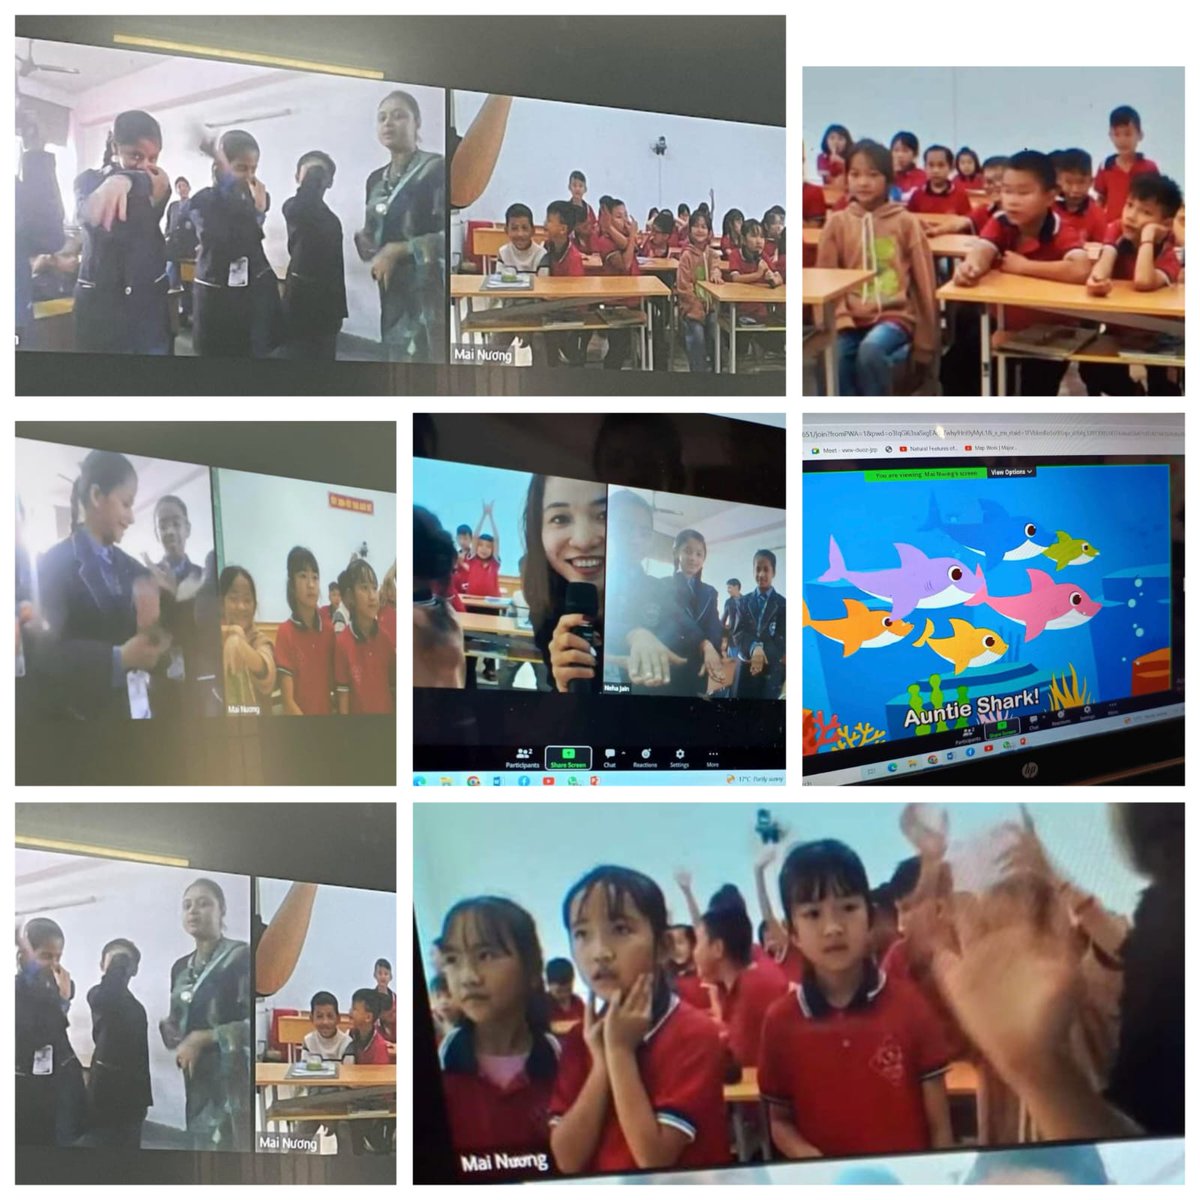 Connecting continents in the classroom! 🌏
Preparatory Wing students from MAPS joined forces with Thanh Tuong Primary School, Vietnam, fostering cross-cultural bonds. Exploring worlds, sharing insights, and enhancing skills. #MAPS #CrossCulturalLearning  #EducationalCollaboration